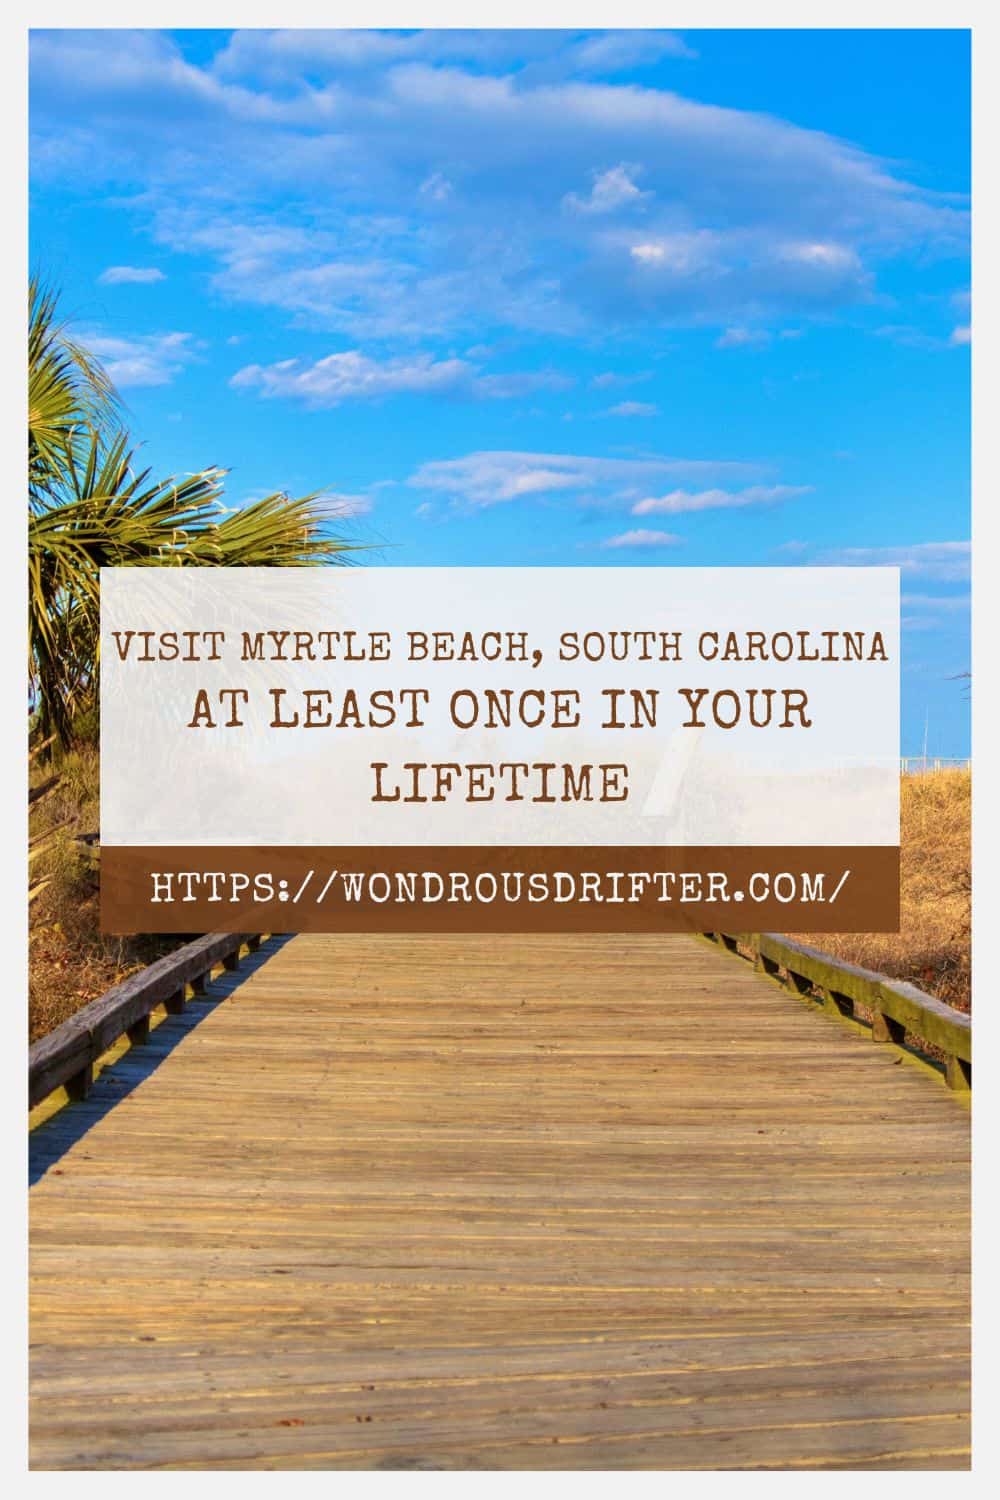 Visit Myrtle Beach South Carolina at least once in your lifetime